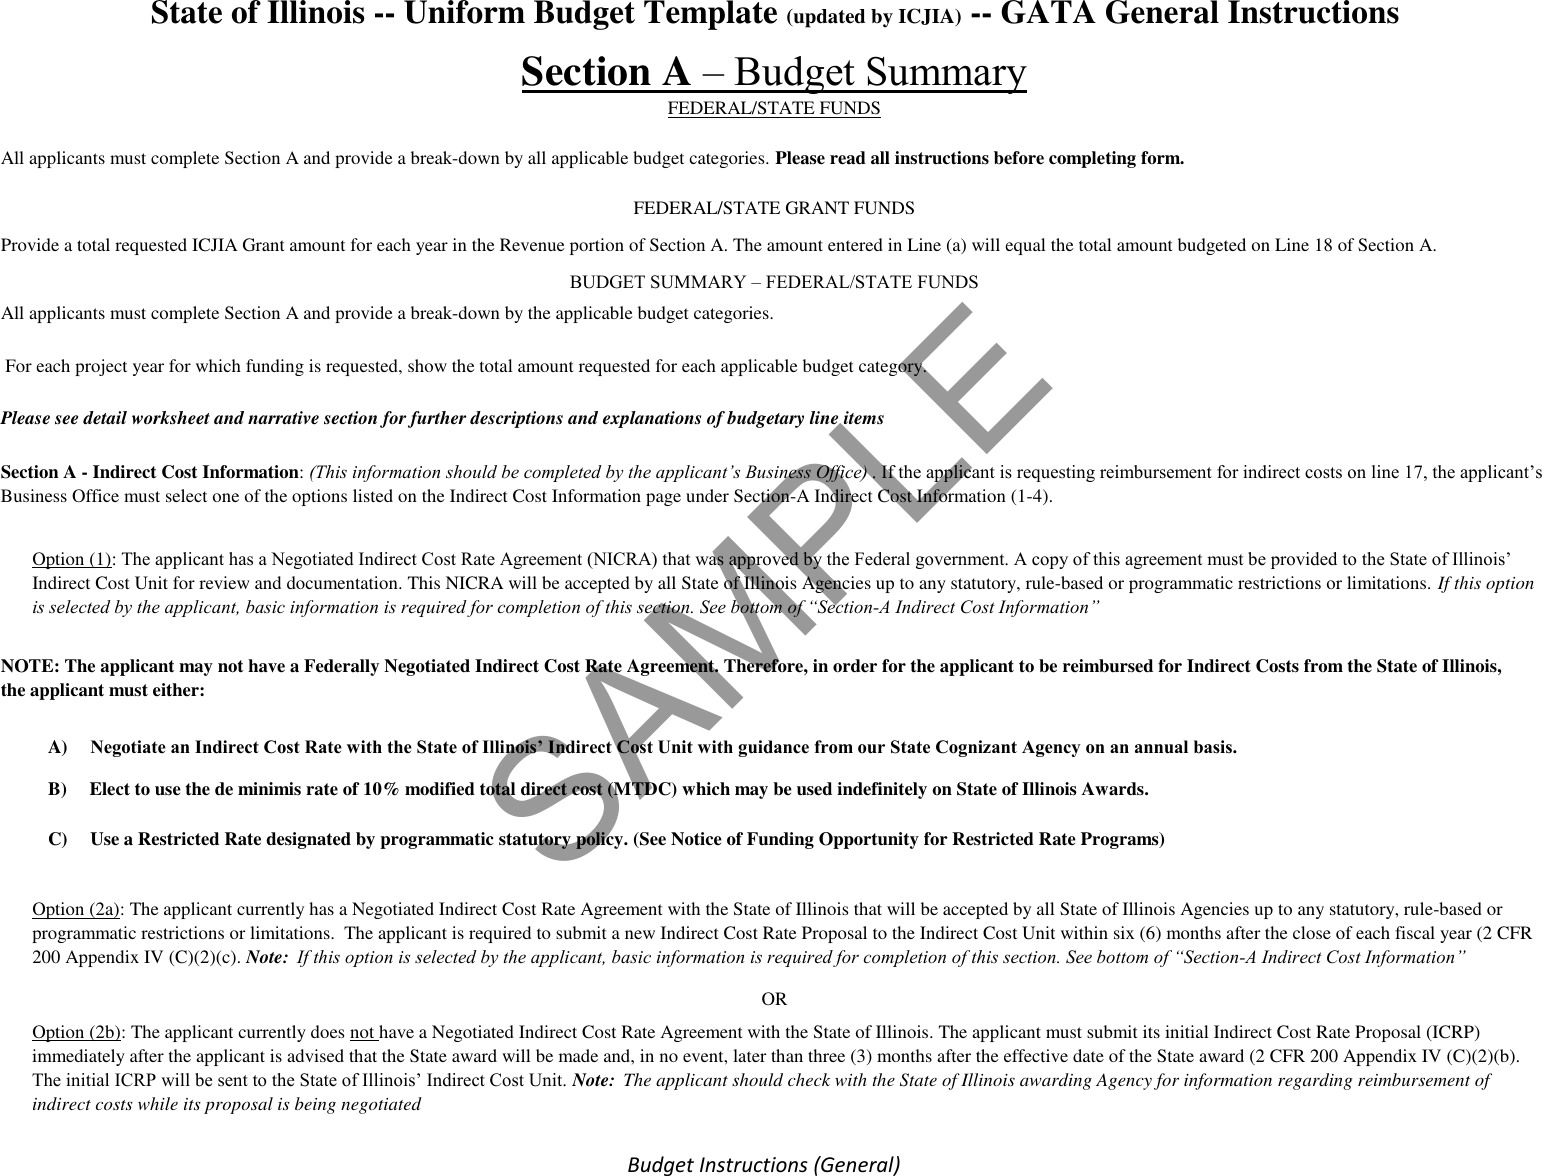 Page 1 of 3 - ICJIA Sample Uniform Budget  / Instructions 032817 GENERAL